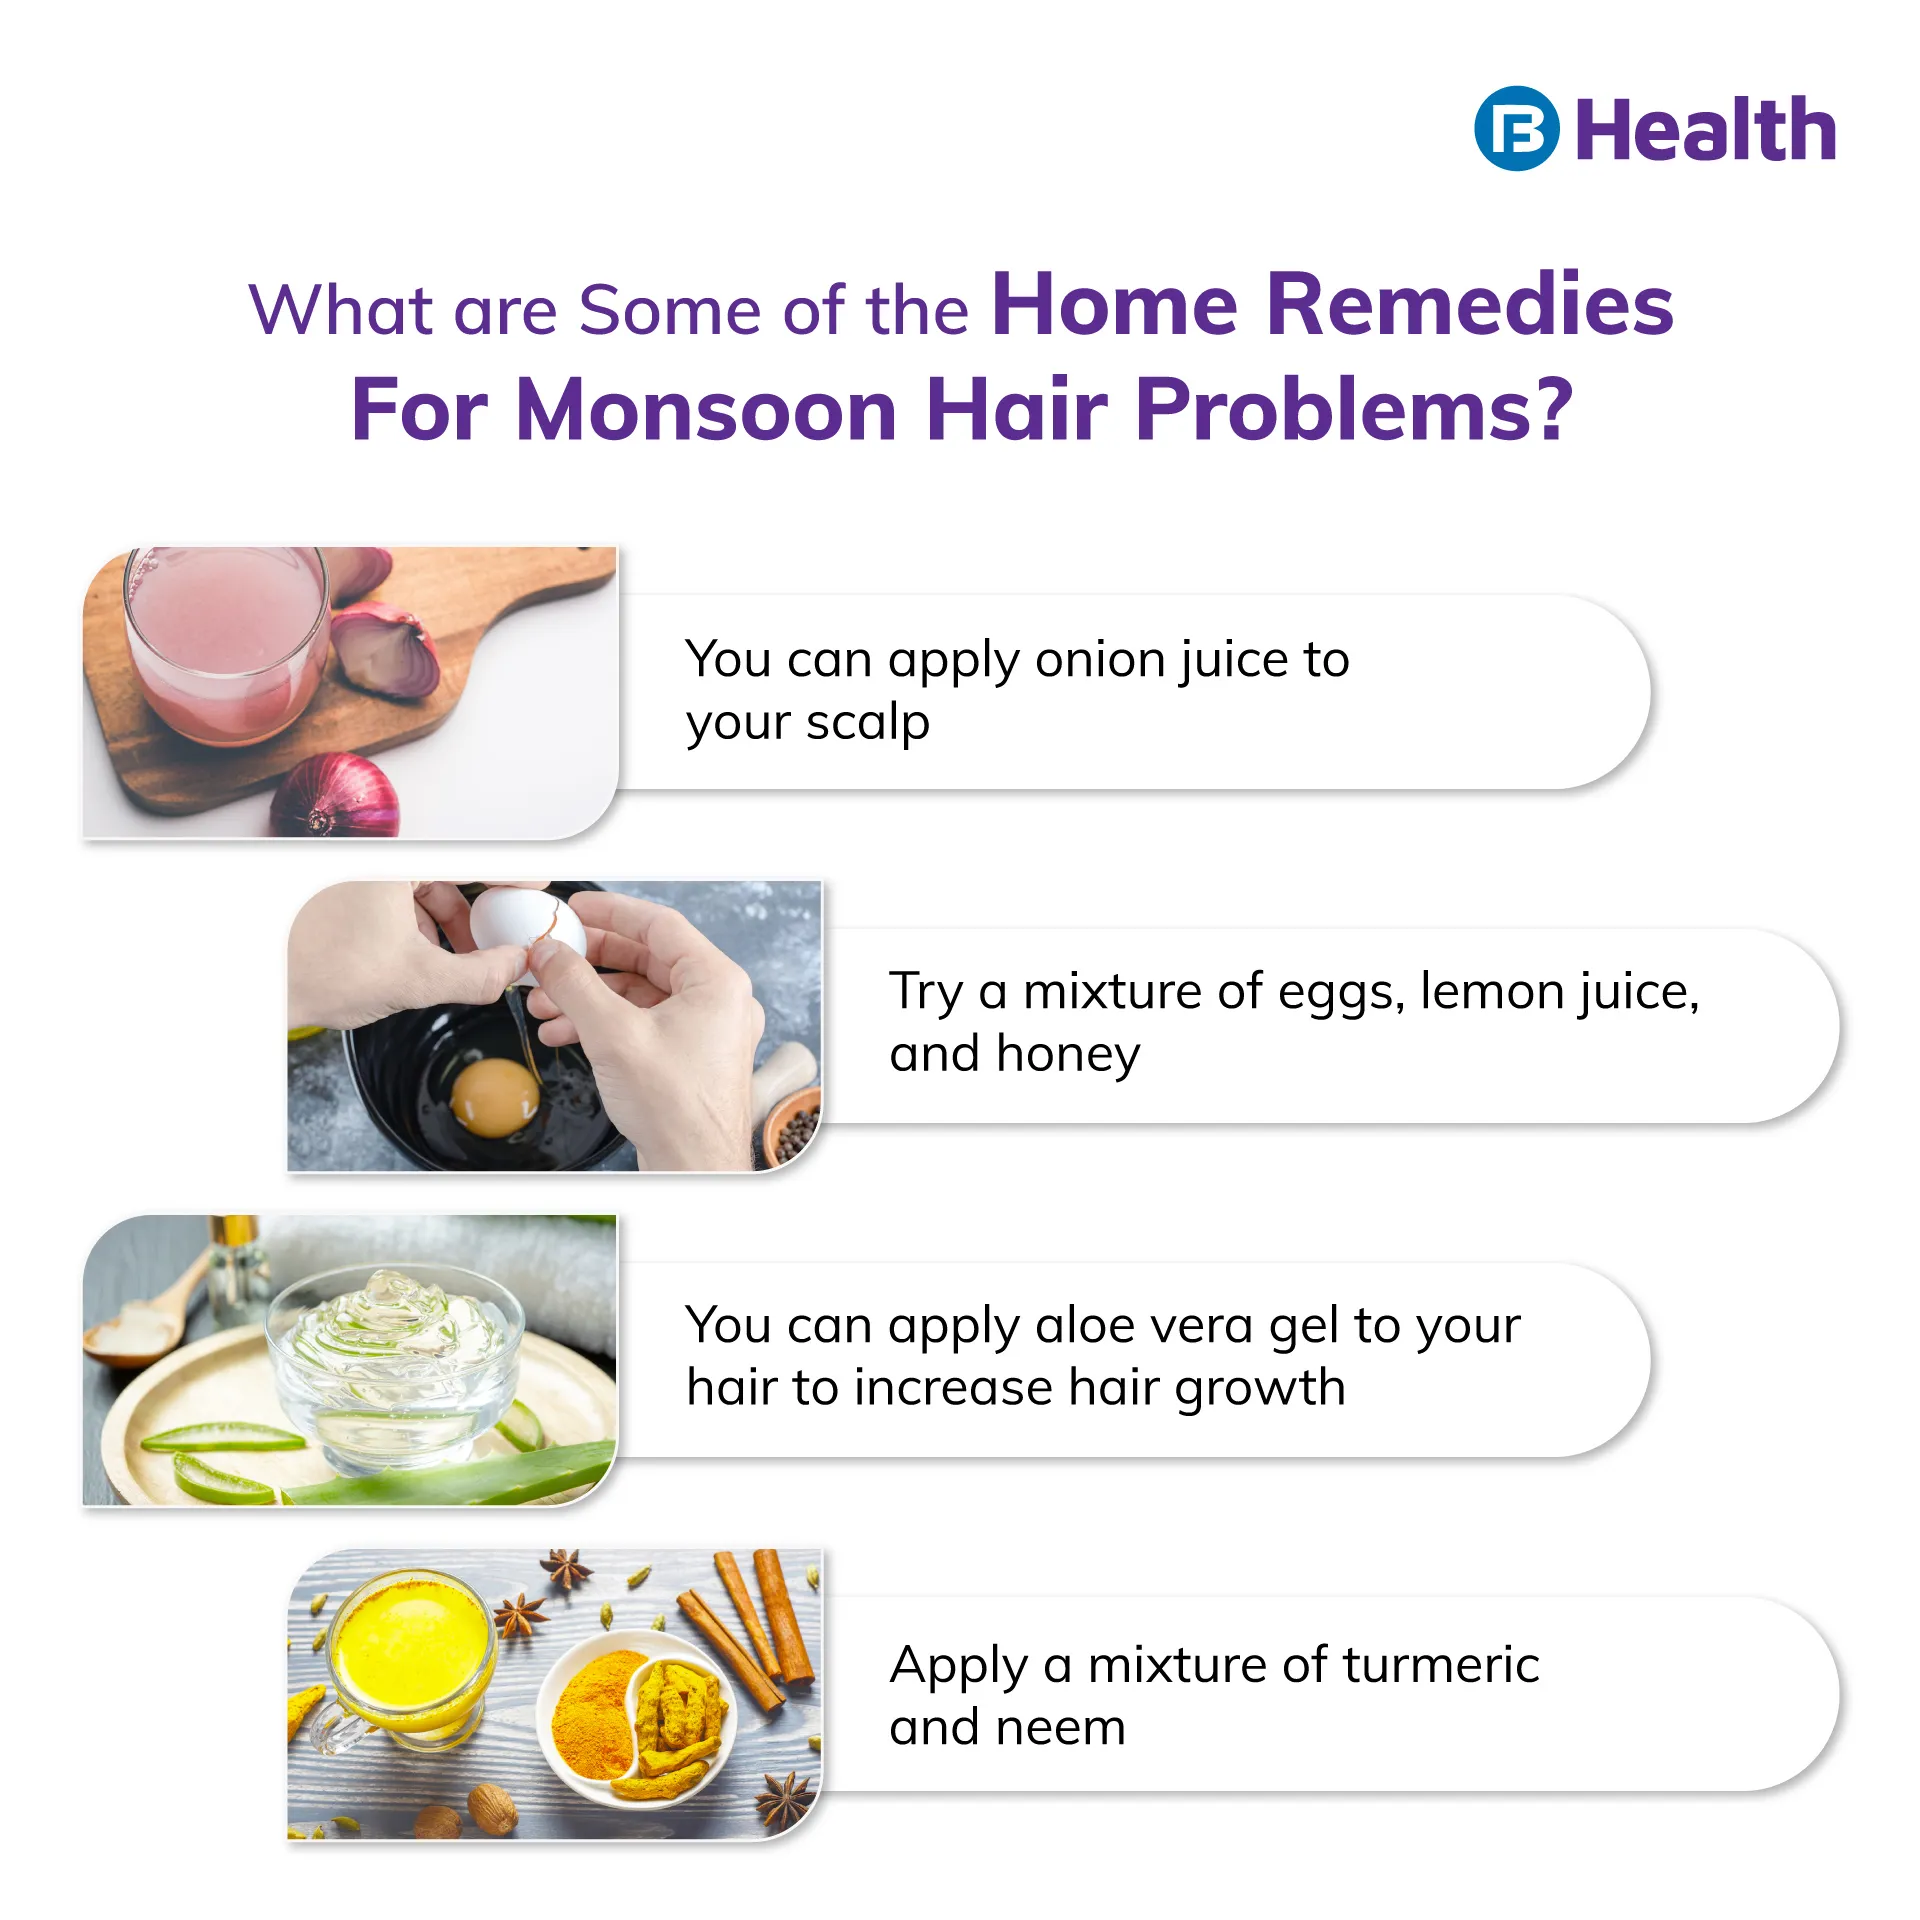 Home remedies for Monsoon Hair Problems